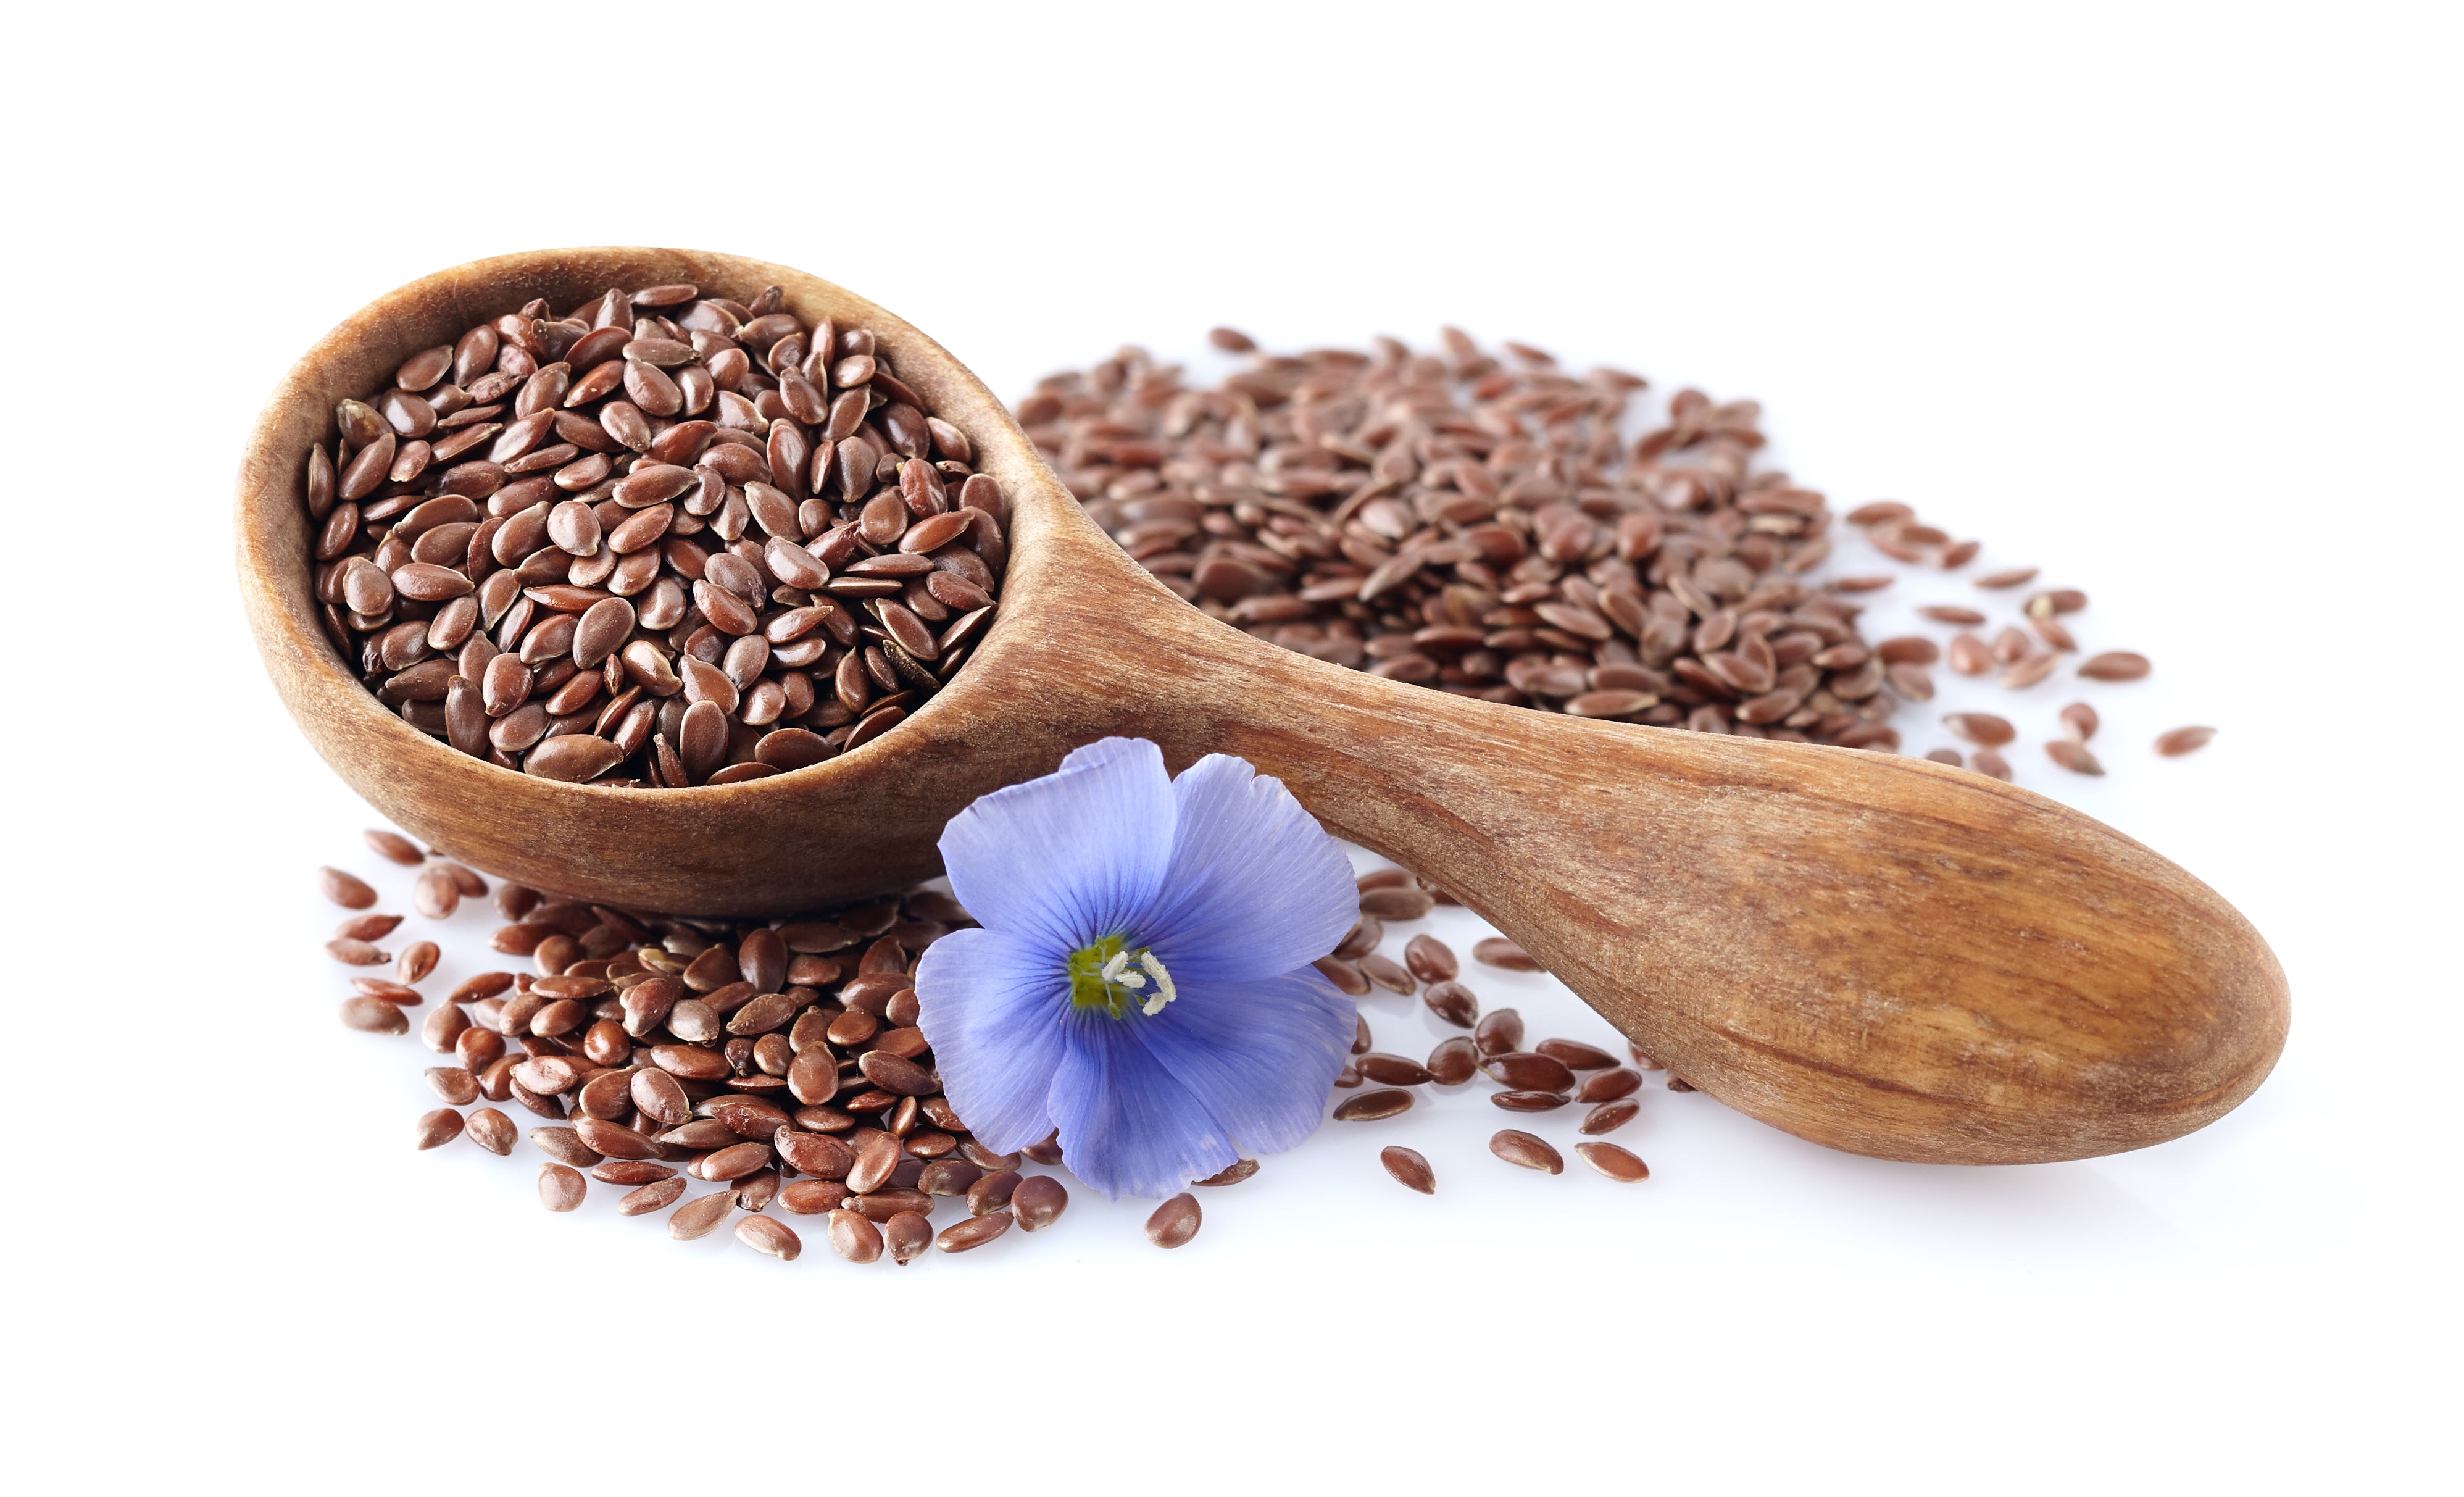 Flaxseeds for promoting healthy hair, skin, and nails